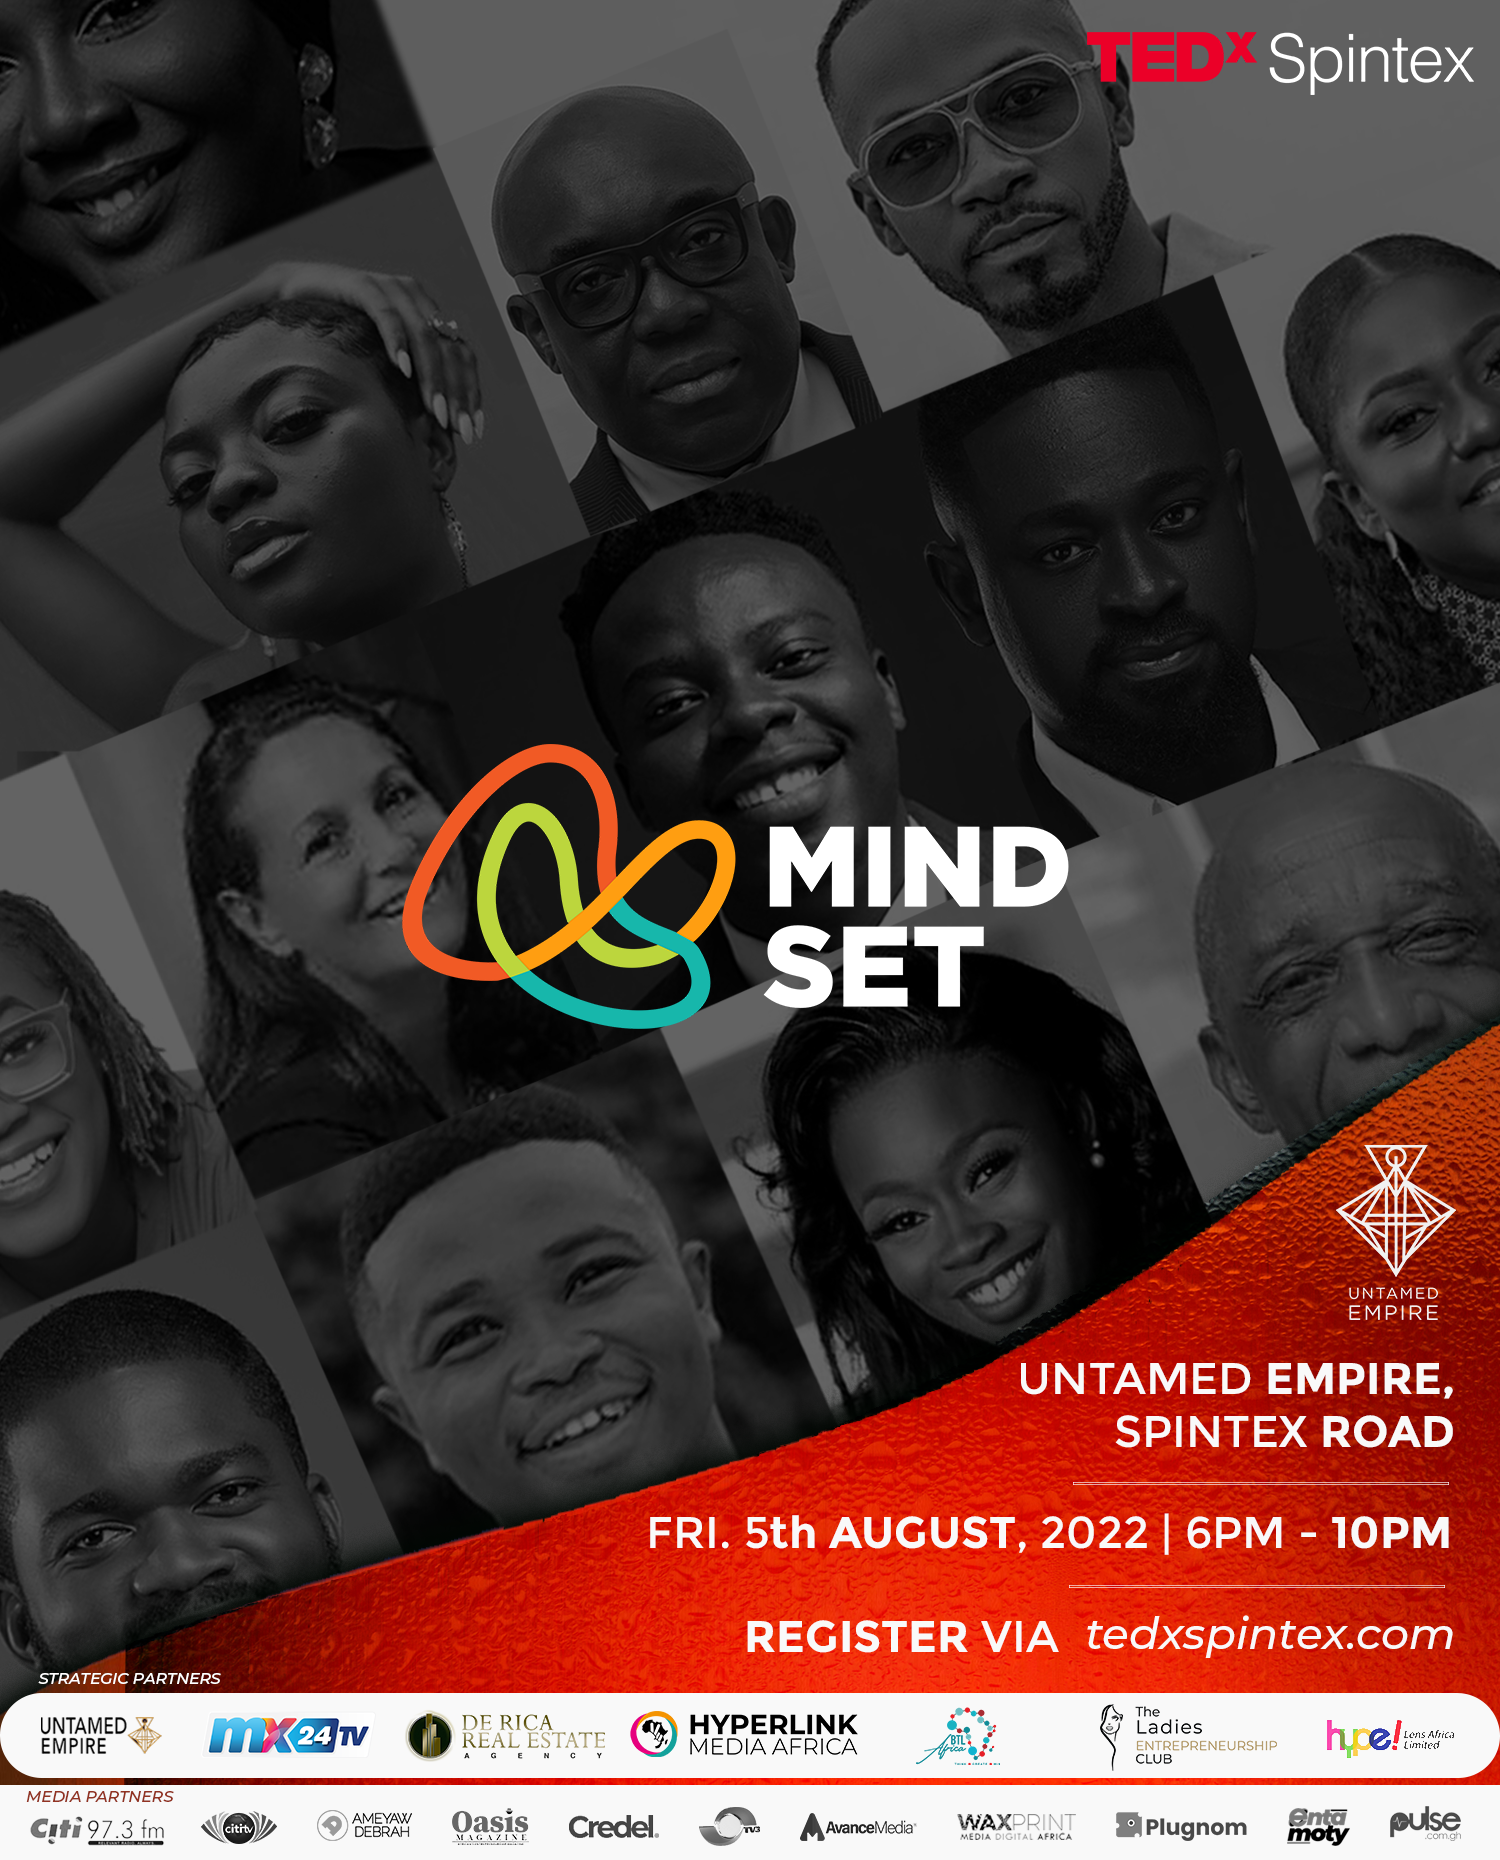 TEDxSpintex event features mind-blowing speakers on ‘MINDSET’ happening on August 5